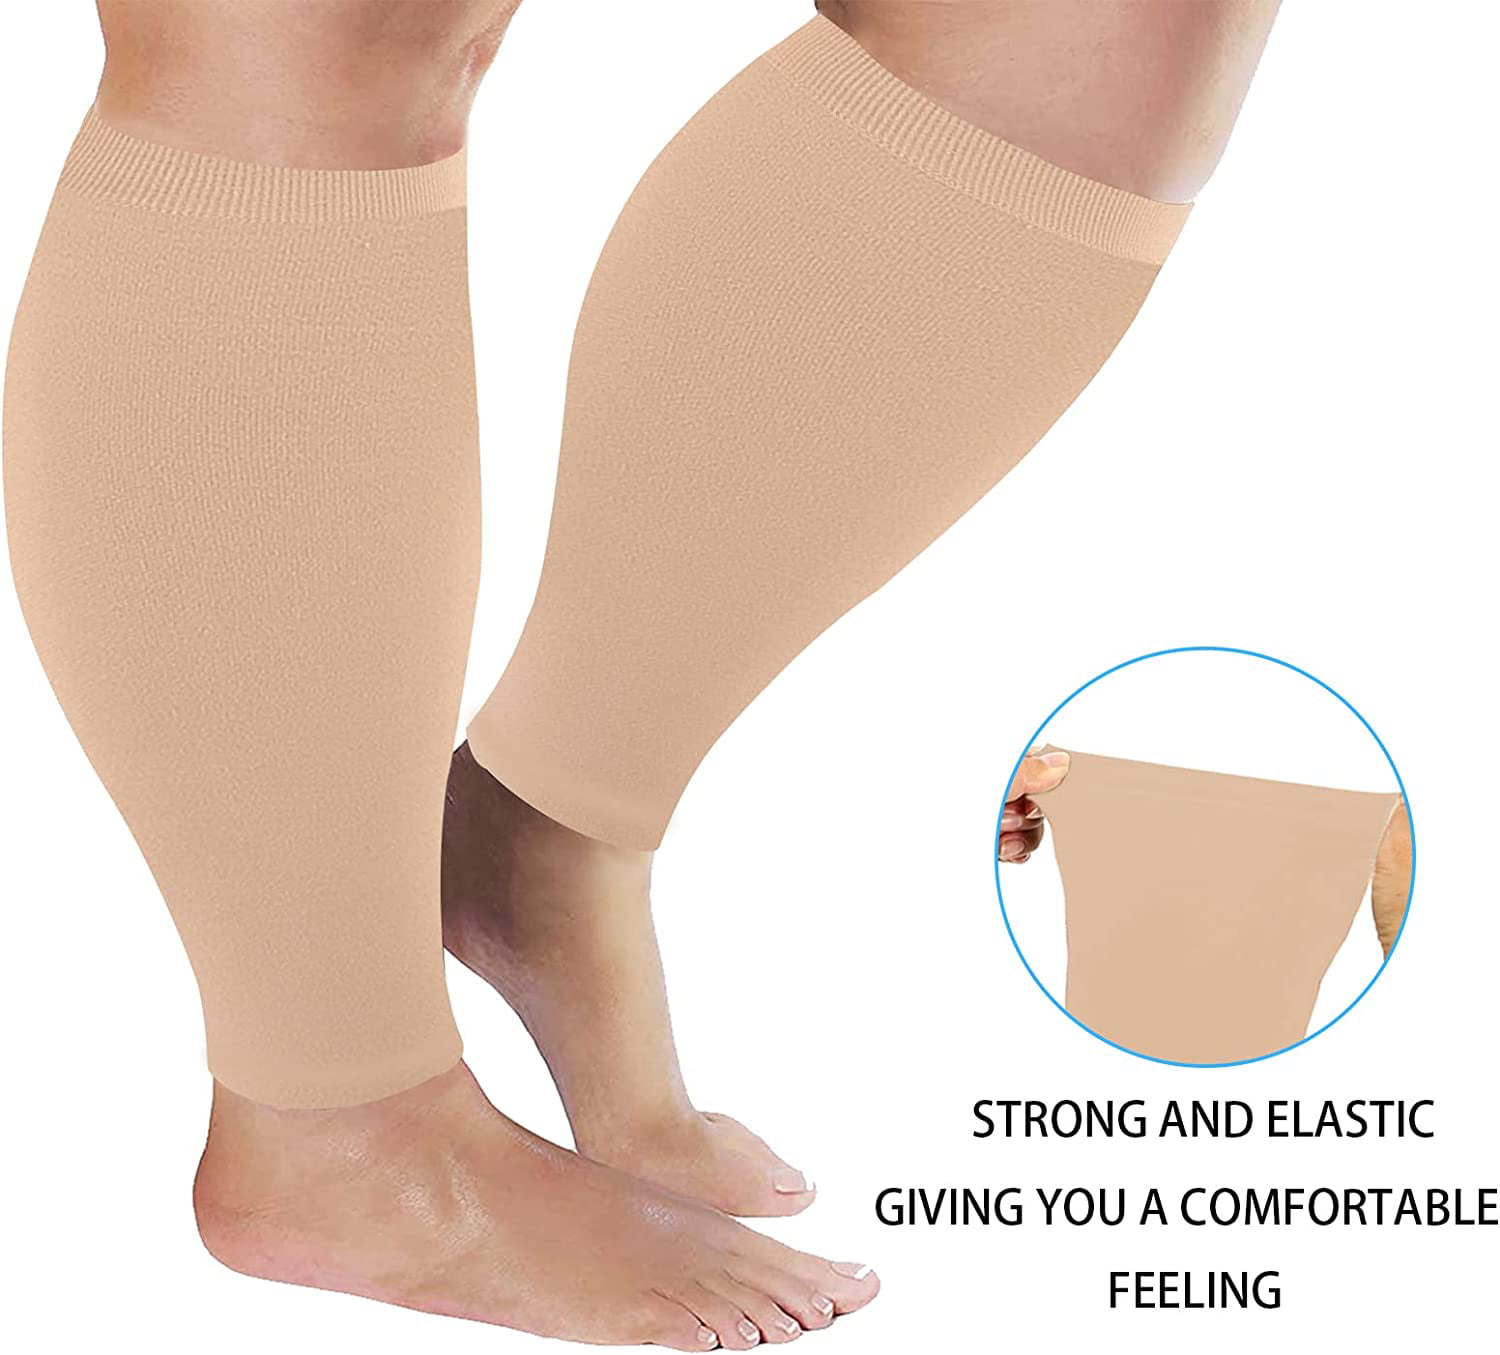 Plus Size Compression Sleeves for Calves Women Wide Calf Compression Legs  Sleeves Men L, Relieve Varicose Veins, Edema, Swelling, Soreness, Shin  splints, for Work, Travel, Sports and Daily Wear 